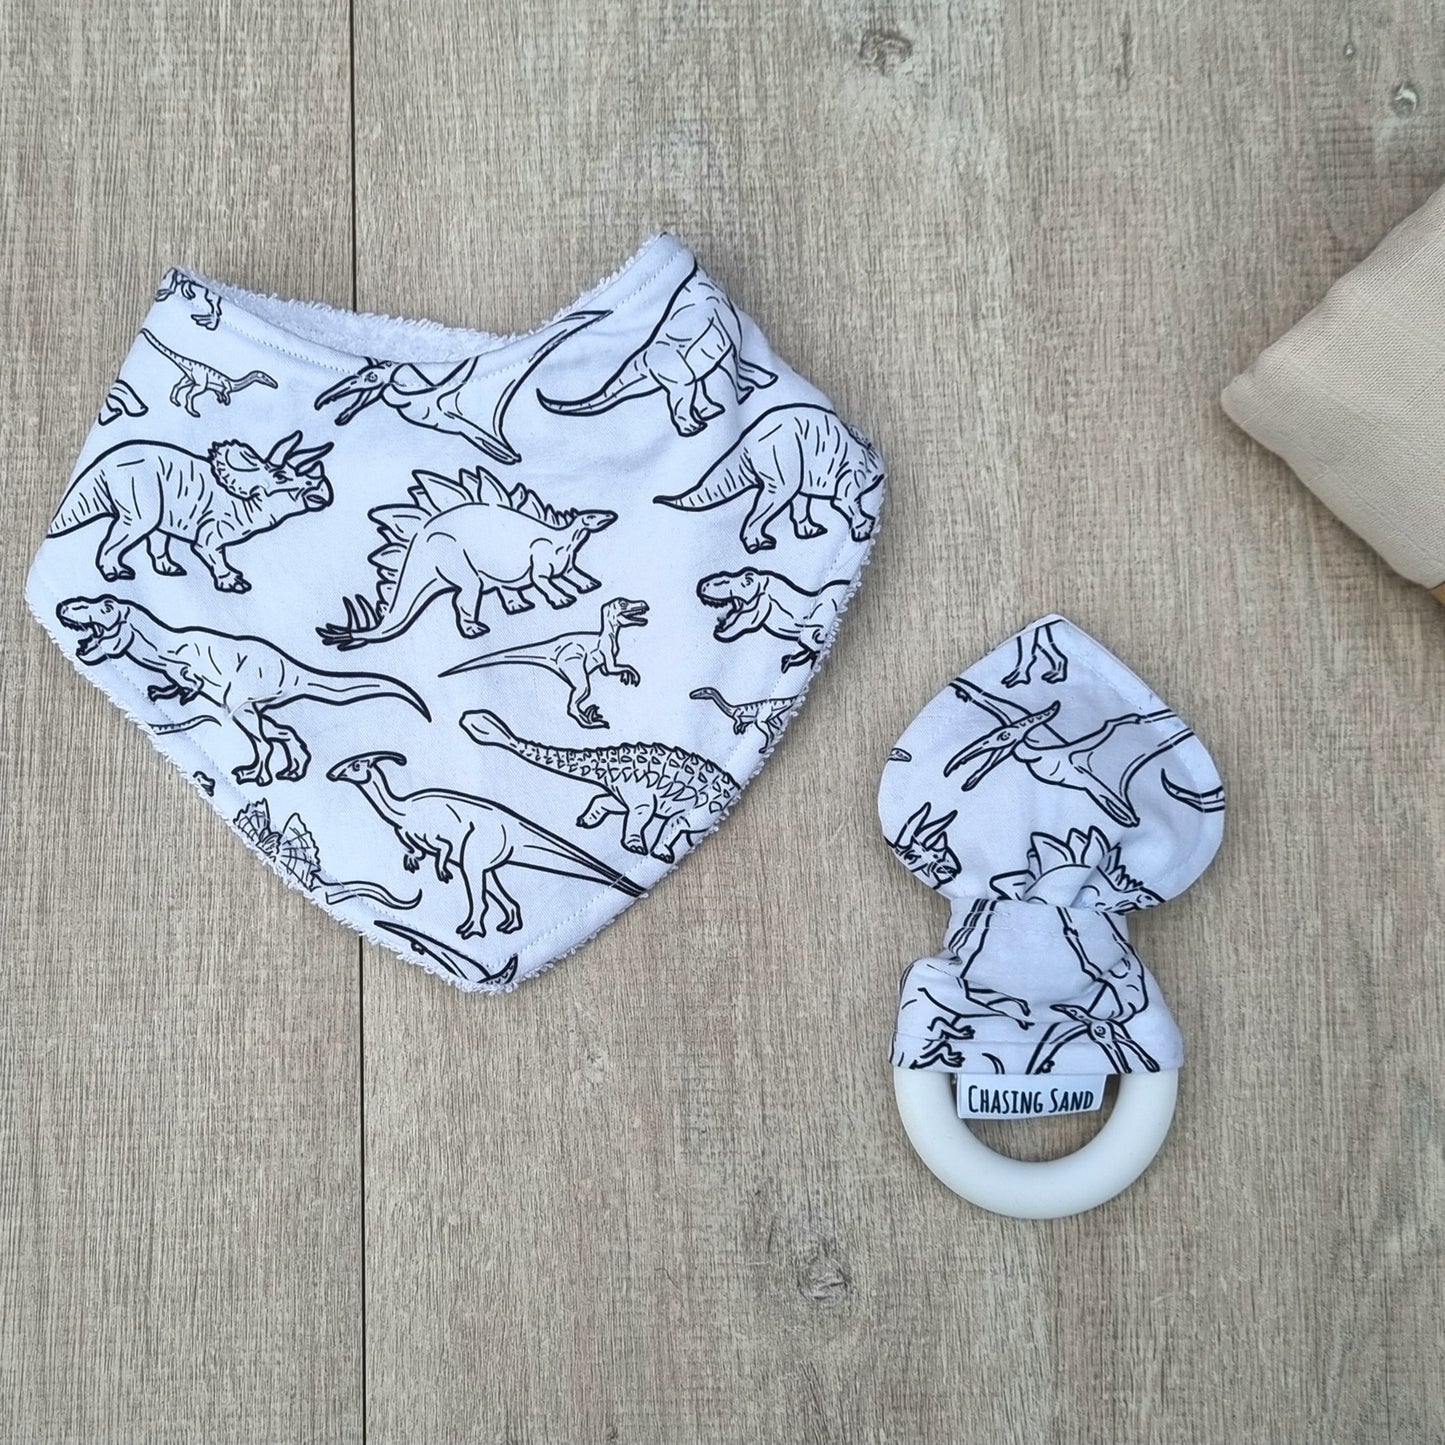 2 Piece Gift Set - B&W Dino against wooden backdrop. Black dinosaur design on white background. Layer bib and matching teether.